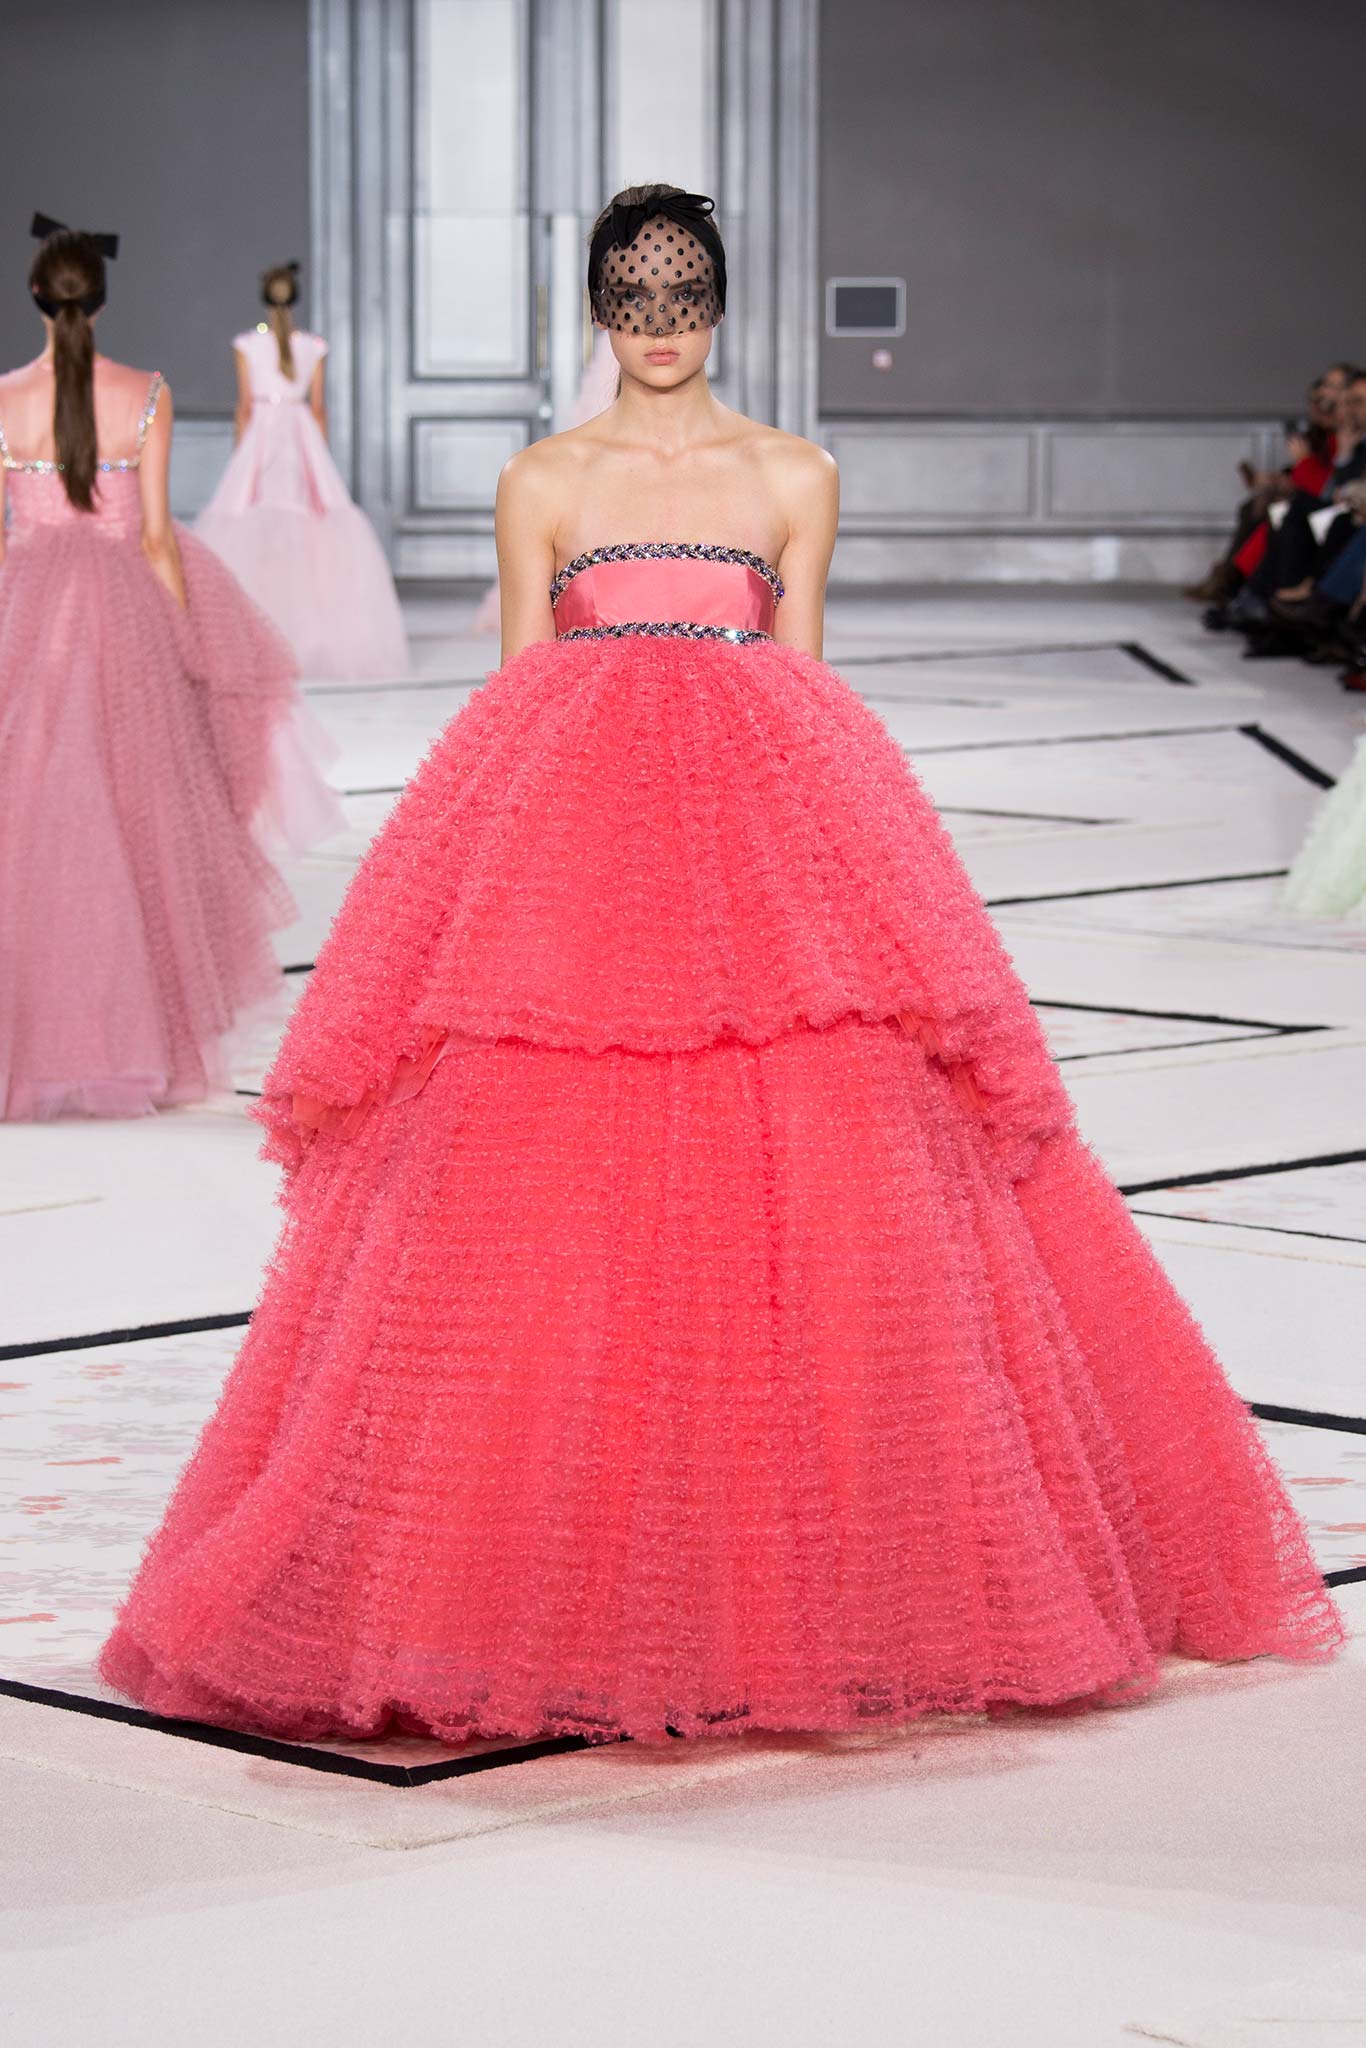 Style Inspiration: Top 10 Fairytale Looks from the Spring 2015 Couture ...